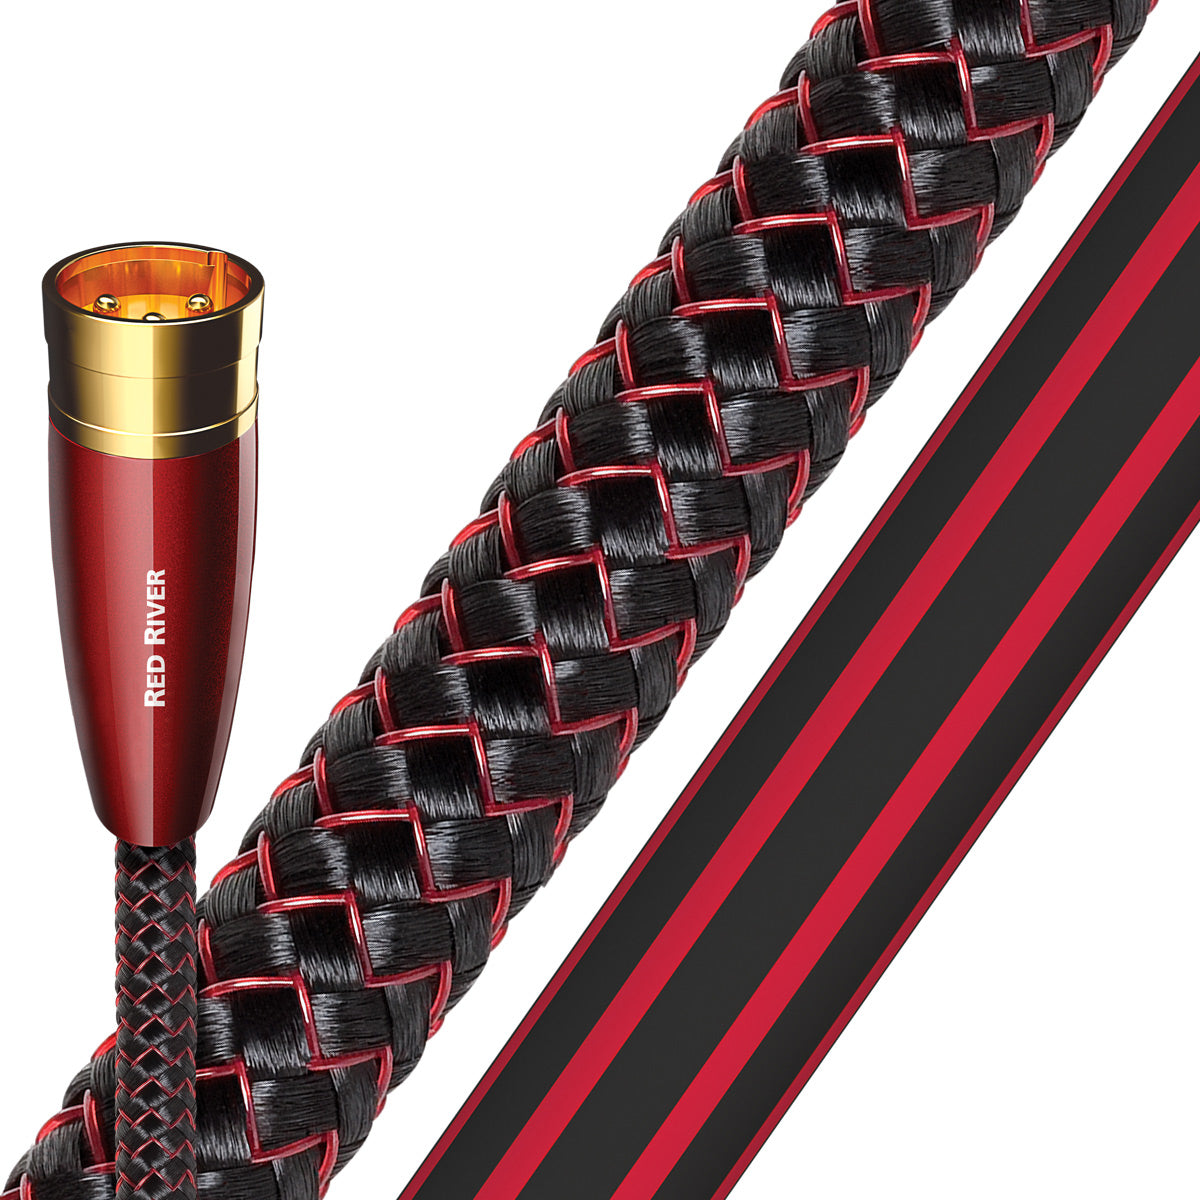 AudioQuest Red River Male XLR to Female XLR Cable - 3.28 ft. (1m) - 2-Pack